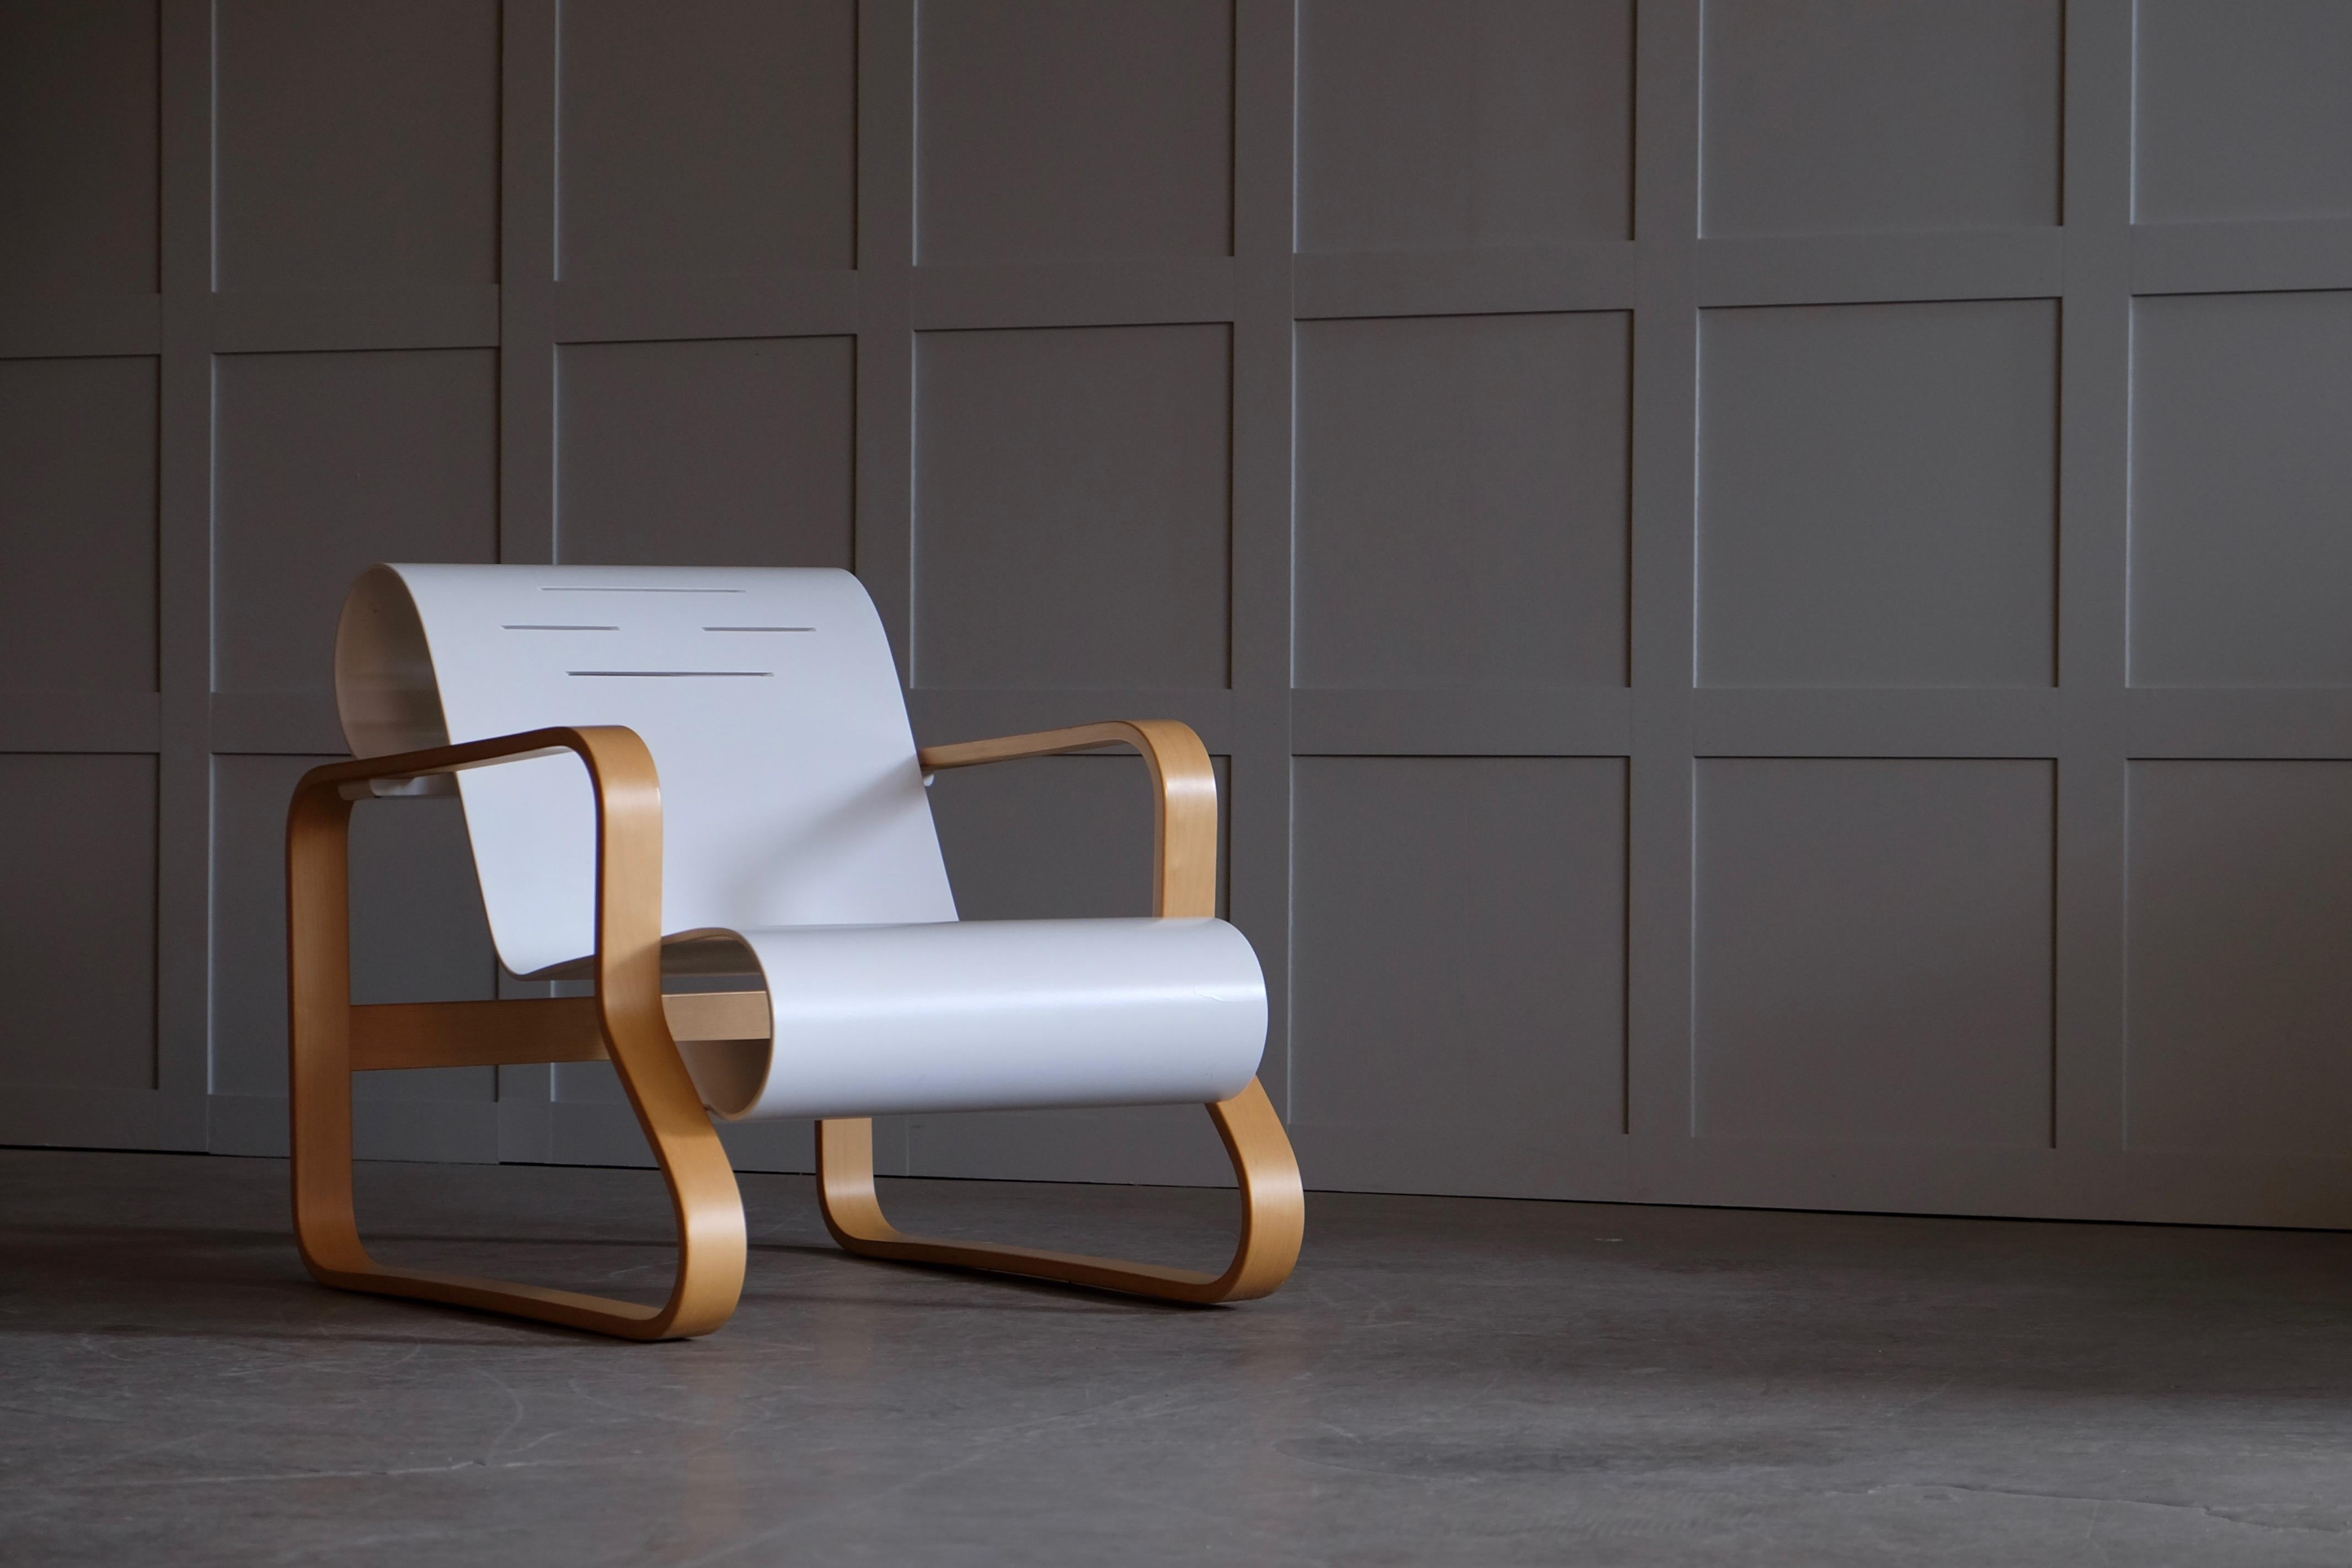 Produced late 1970s by Artek. Excellent condition, no signs of usage. Designed by Alvar Aalto in 1932, Armchair 41 was created for the interior of a tuberculosis sanatorium in the Finnish city of Paimio and is considered one of Aalto’s